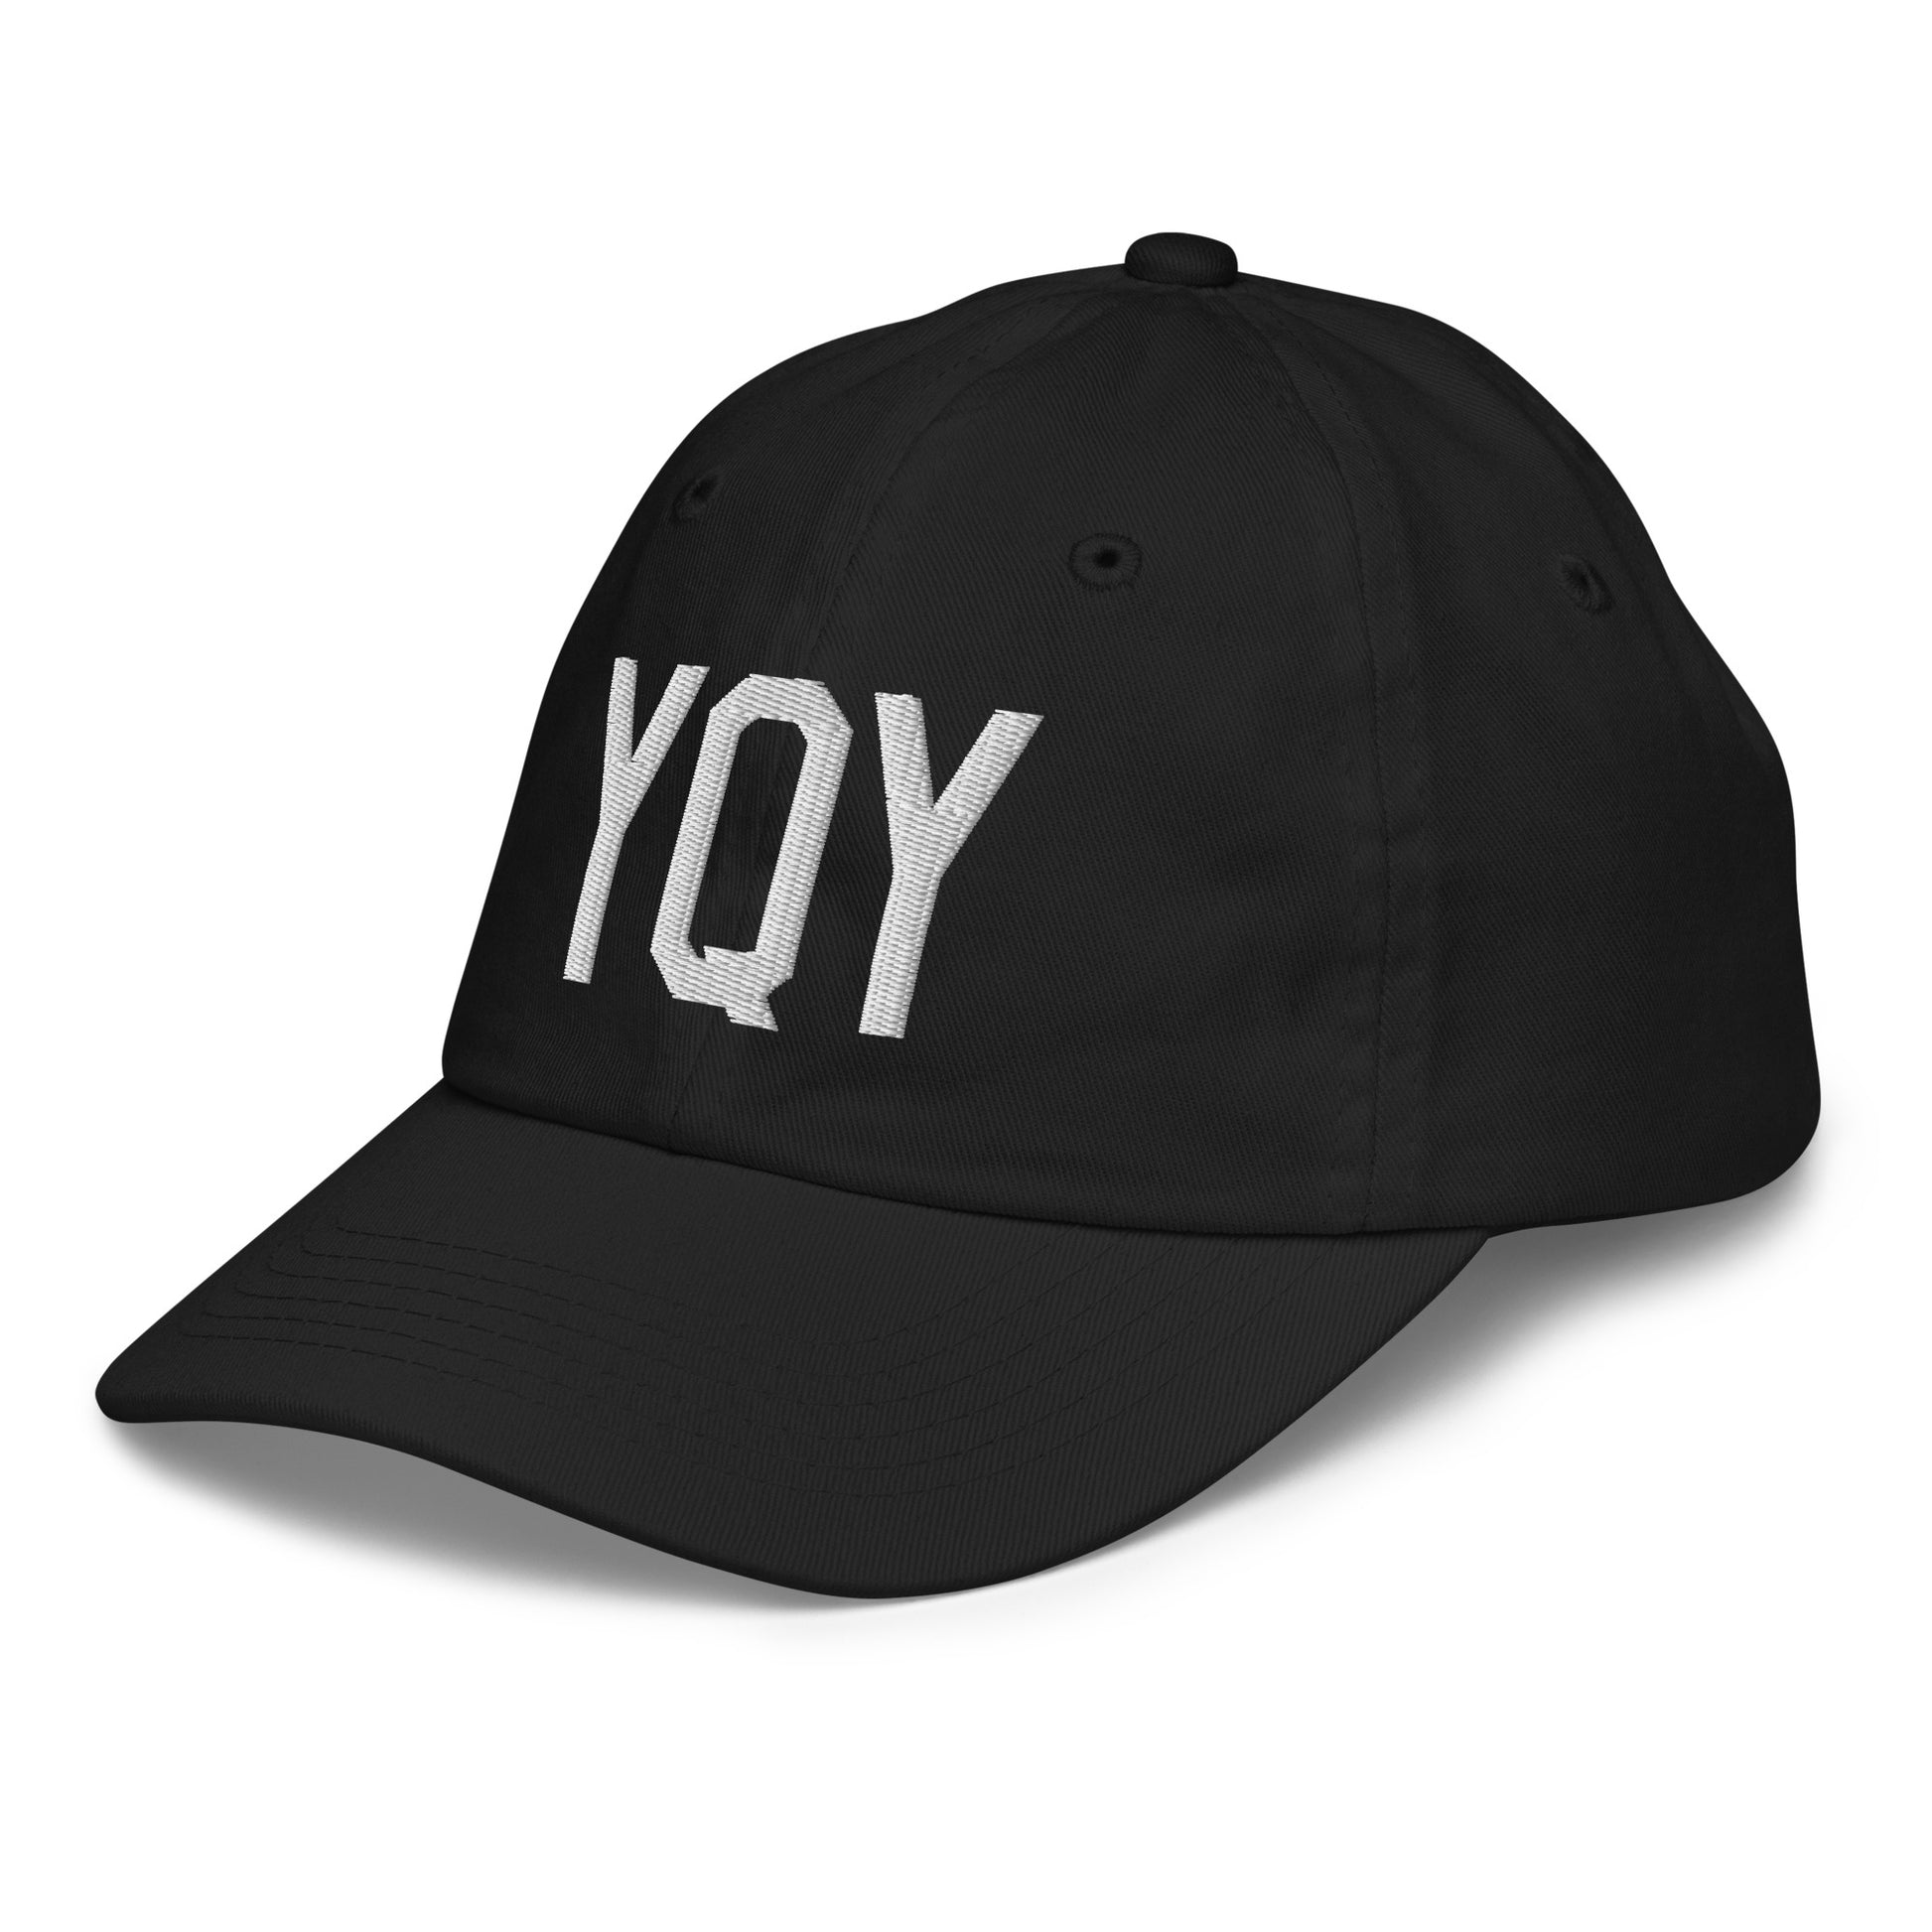 Airport Code Kid's Baseball Cap - White • YQY Sydney • YHM Designs - Image 13